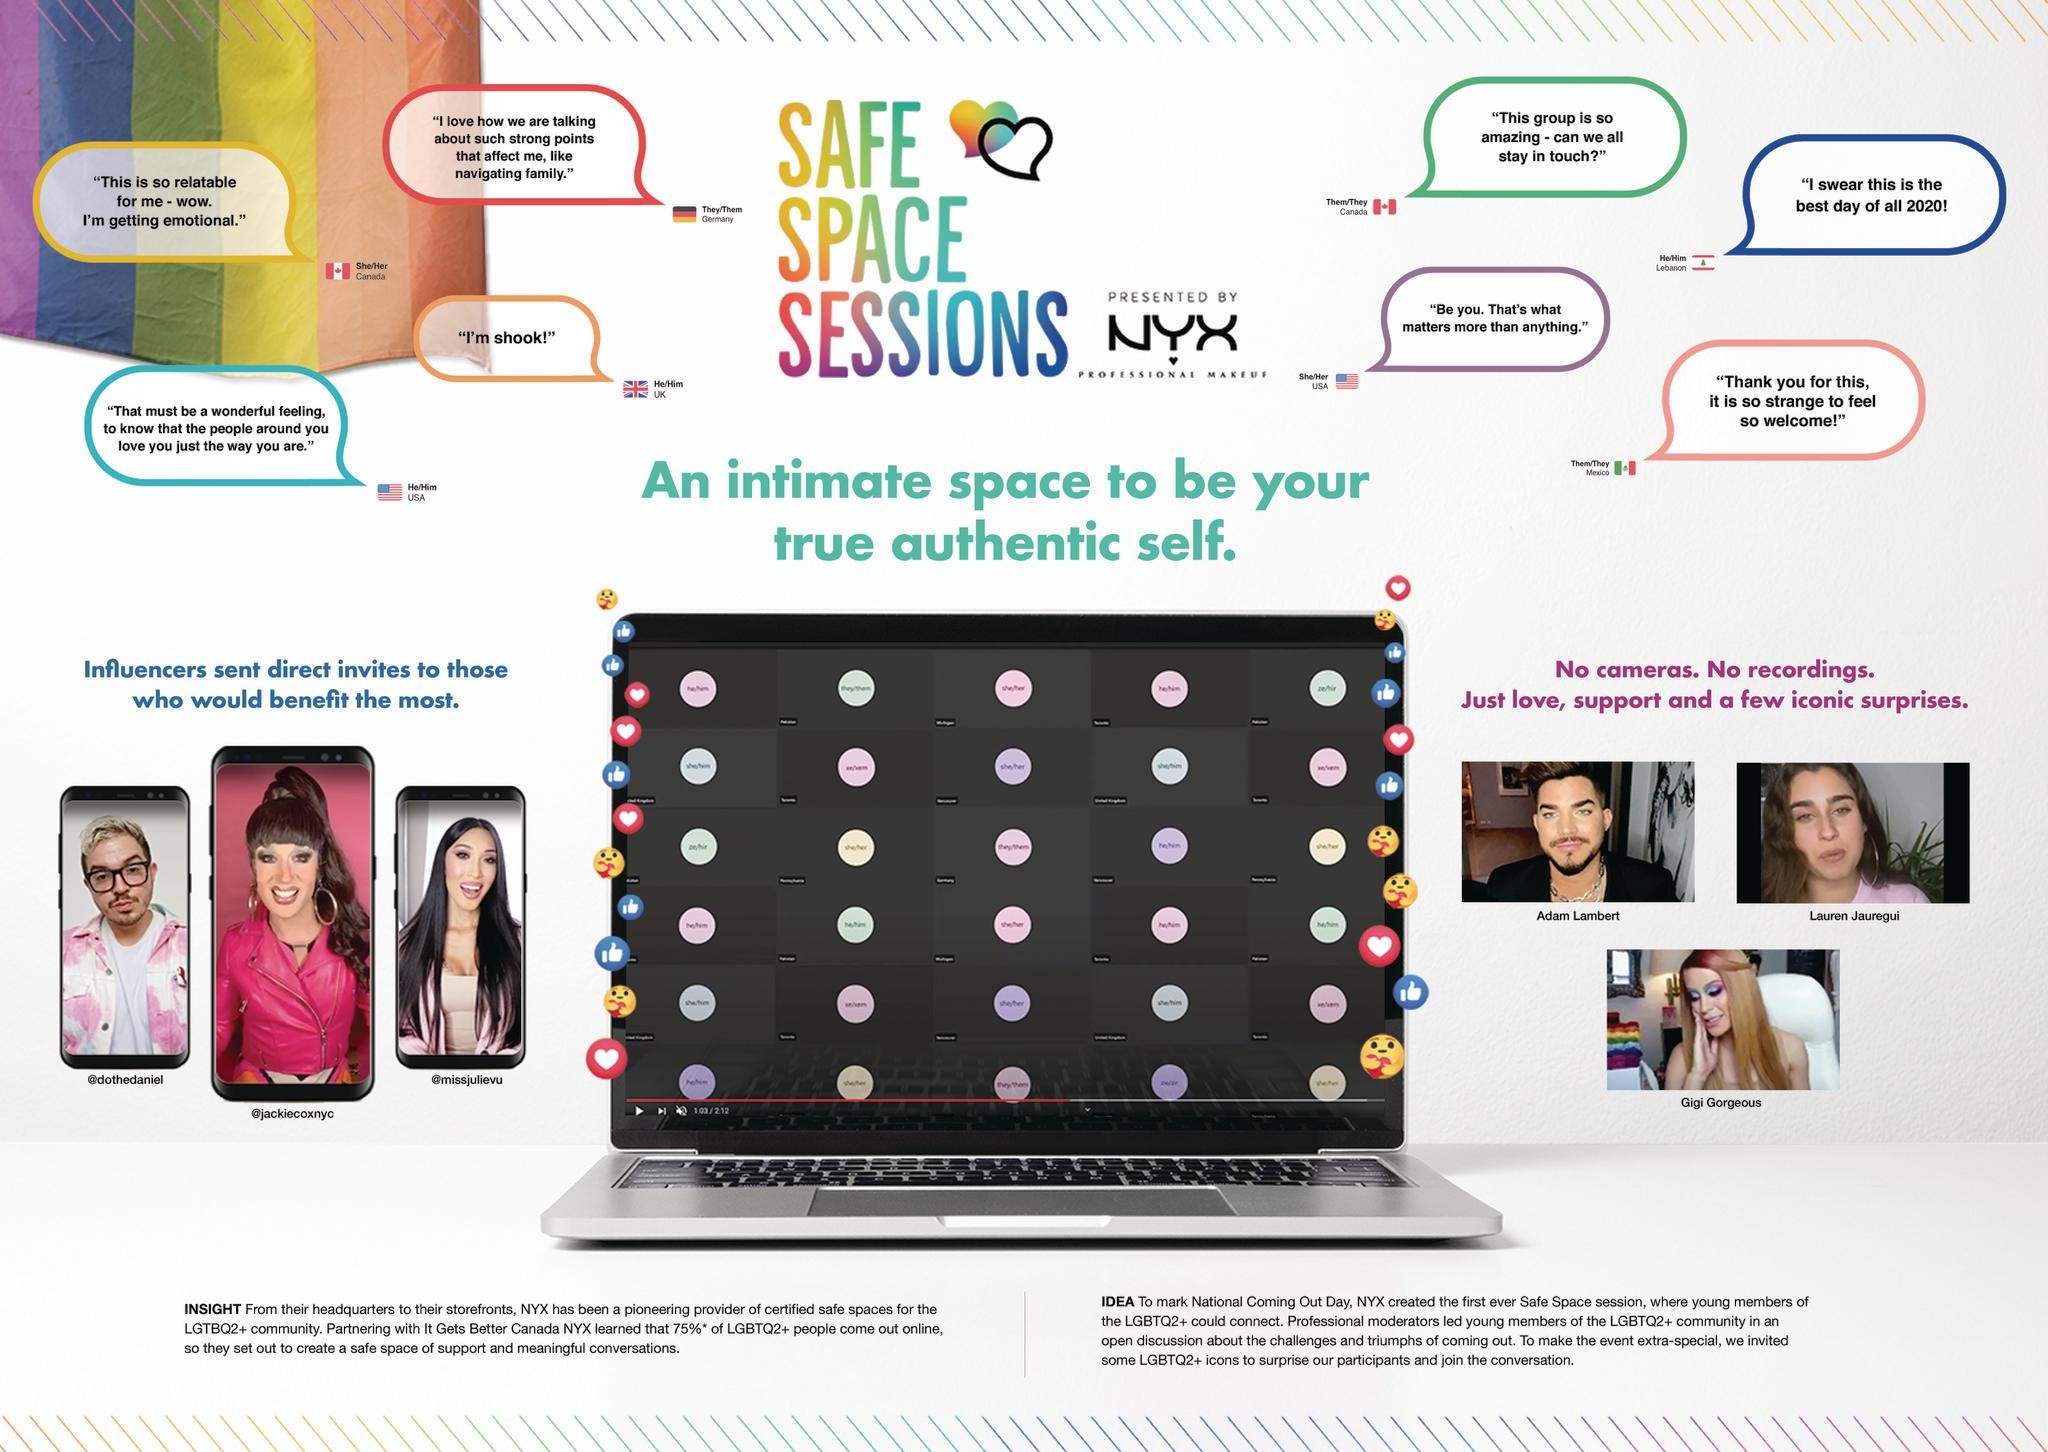 SAFE SPACE SESSIONS